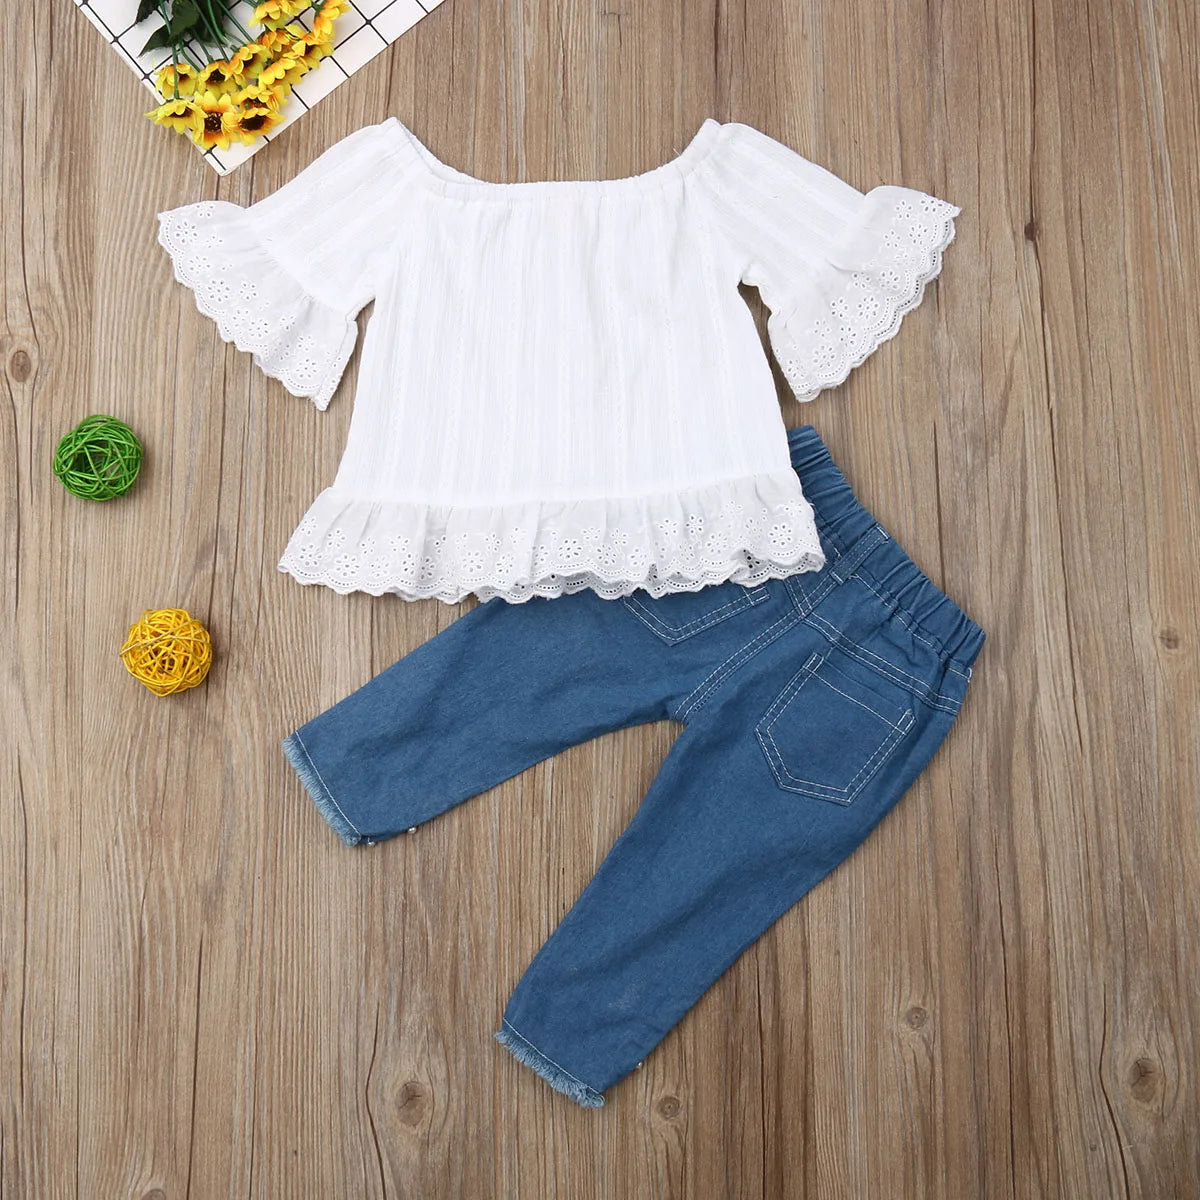 1-6Y Toddler Kids Baby Girls Clothes Sets White Off Shoulder Tops T-shirt Denim Long Pants Jeans Trouser For Girl Outfits